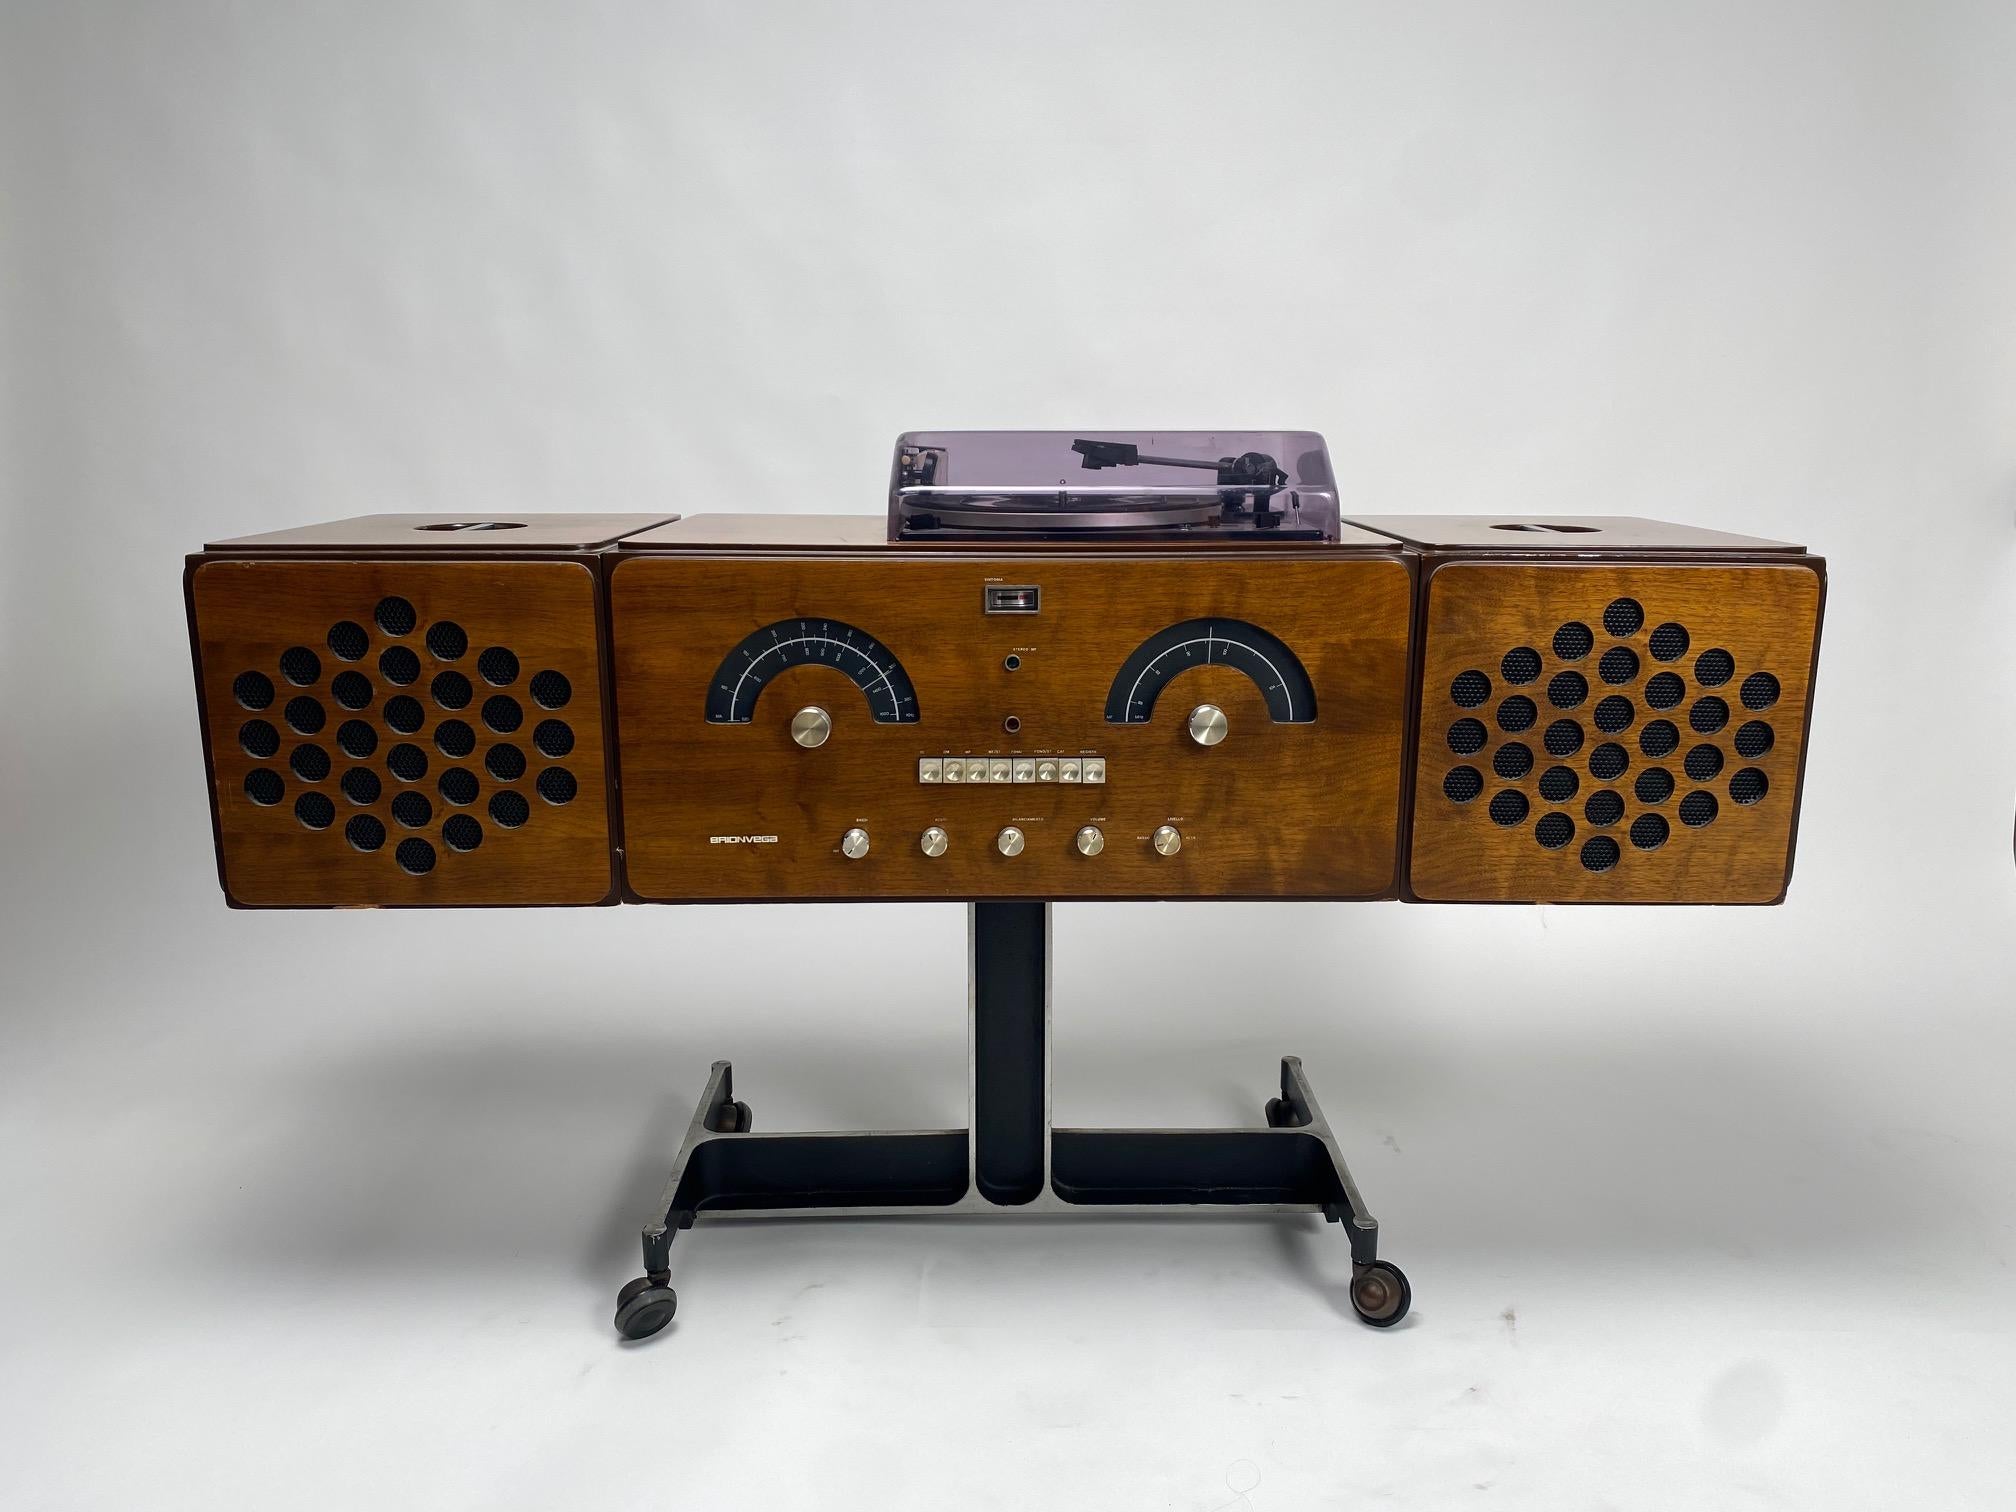 Radiofonografo R126 in Noce Canaletto, di Achille e Pier Giacomo Castiglioni, Brionvega, Italia, 1965

It is one of the most iconic and refined works of the famous pair of Italian architects, an authentic icon of Mid-Century style, a radio and